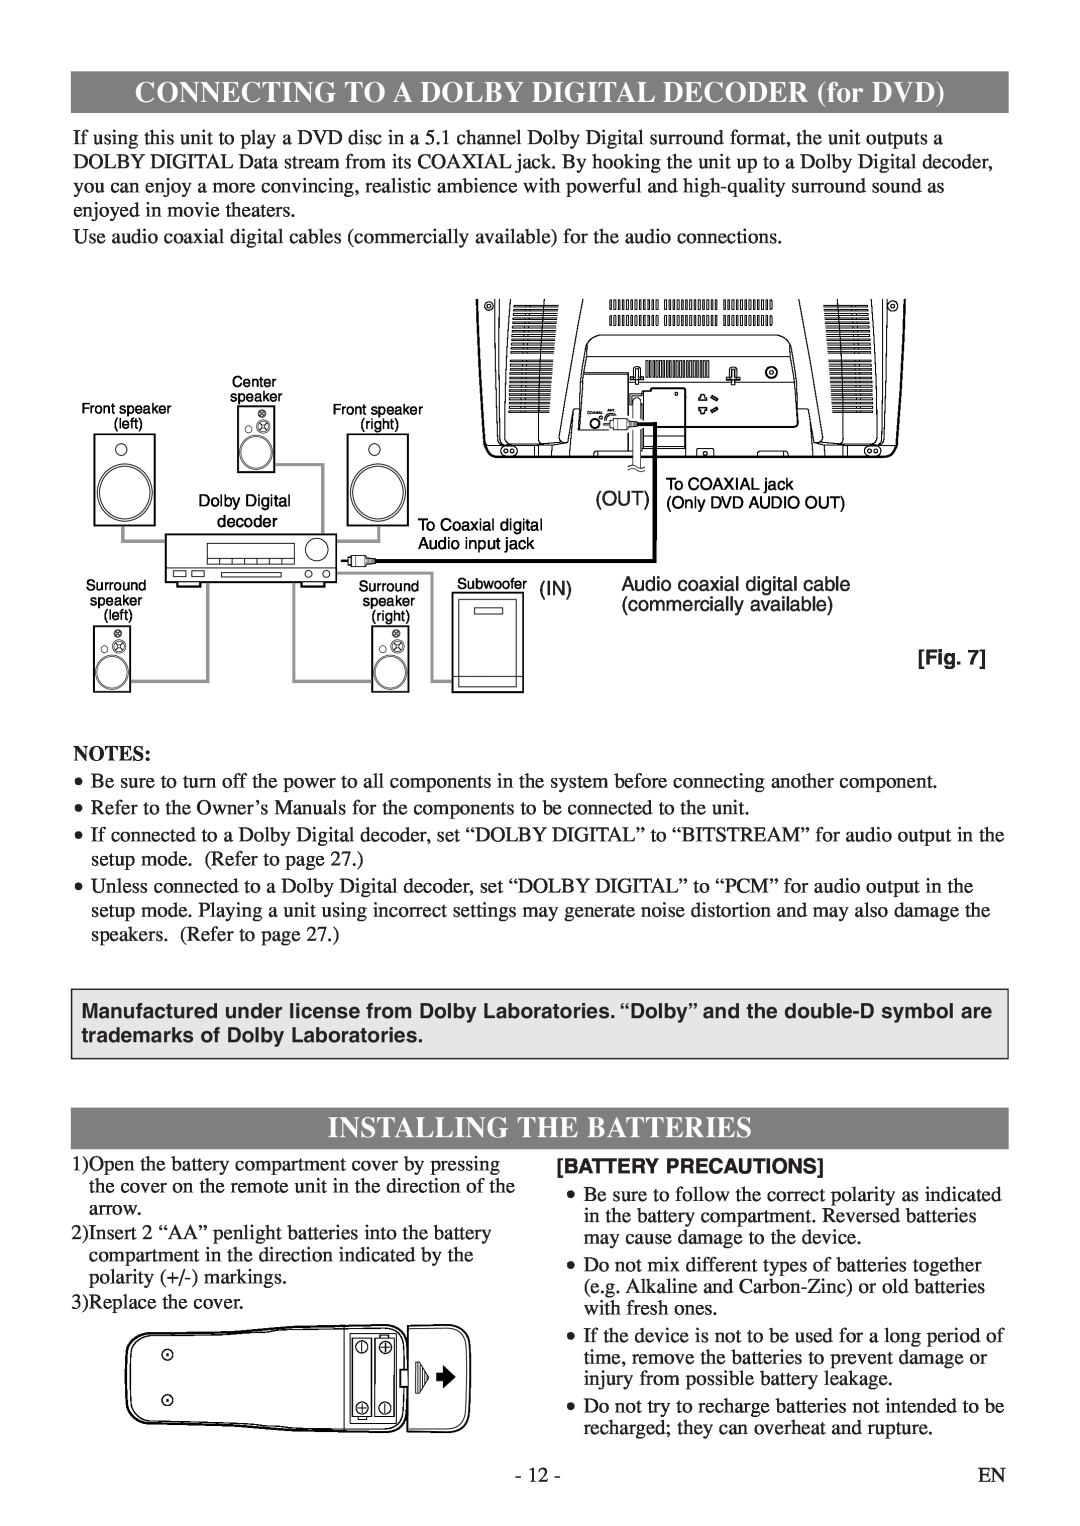 FUNAI MSD520FF owner manual CONNECTING TO A DOLBY DIGITAL DECODER for DVD, Installing The Batteries, Battery Precautions 